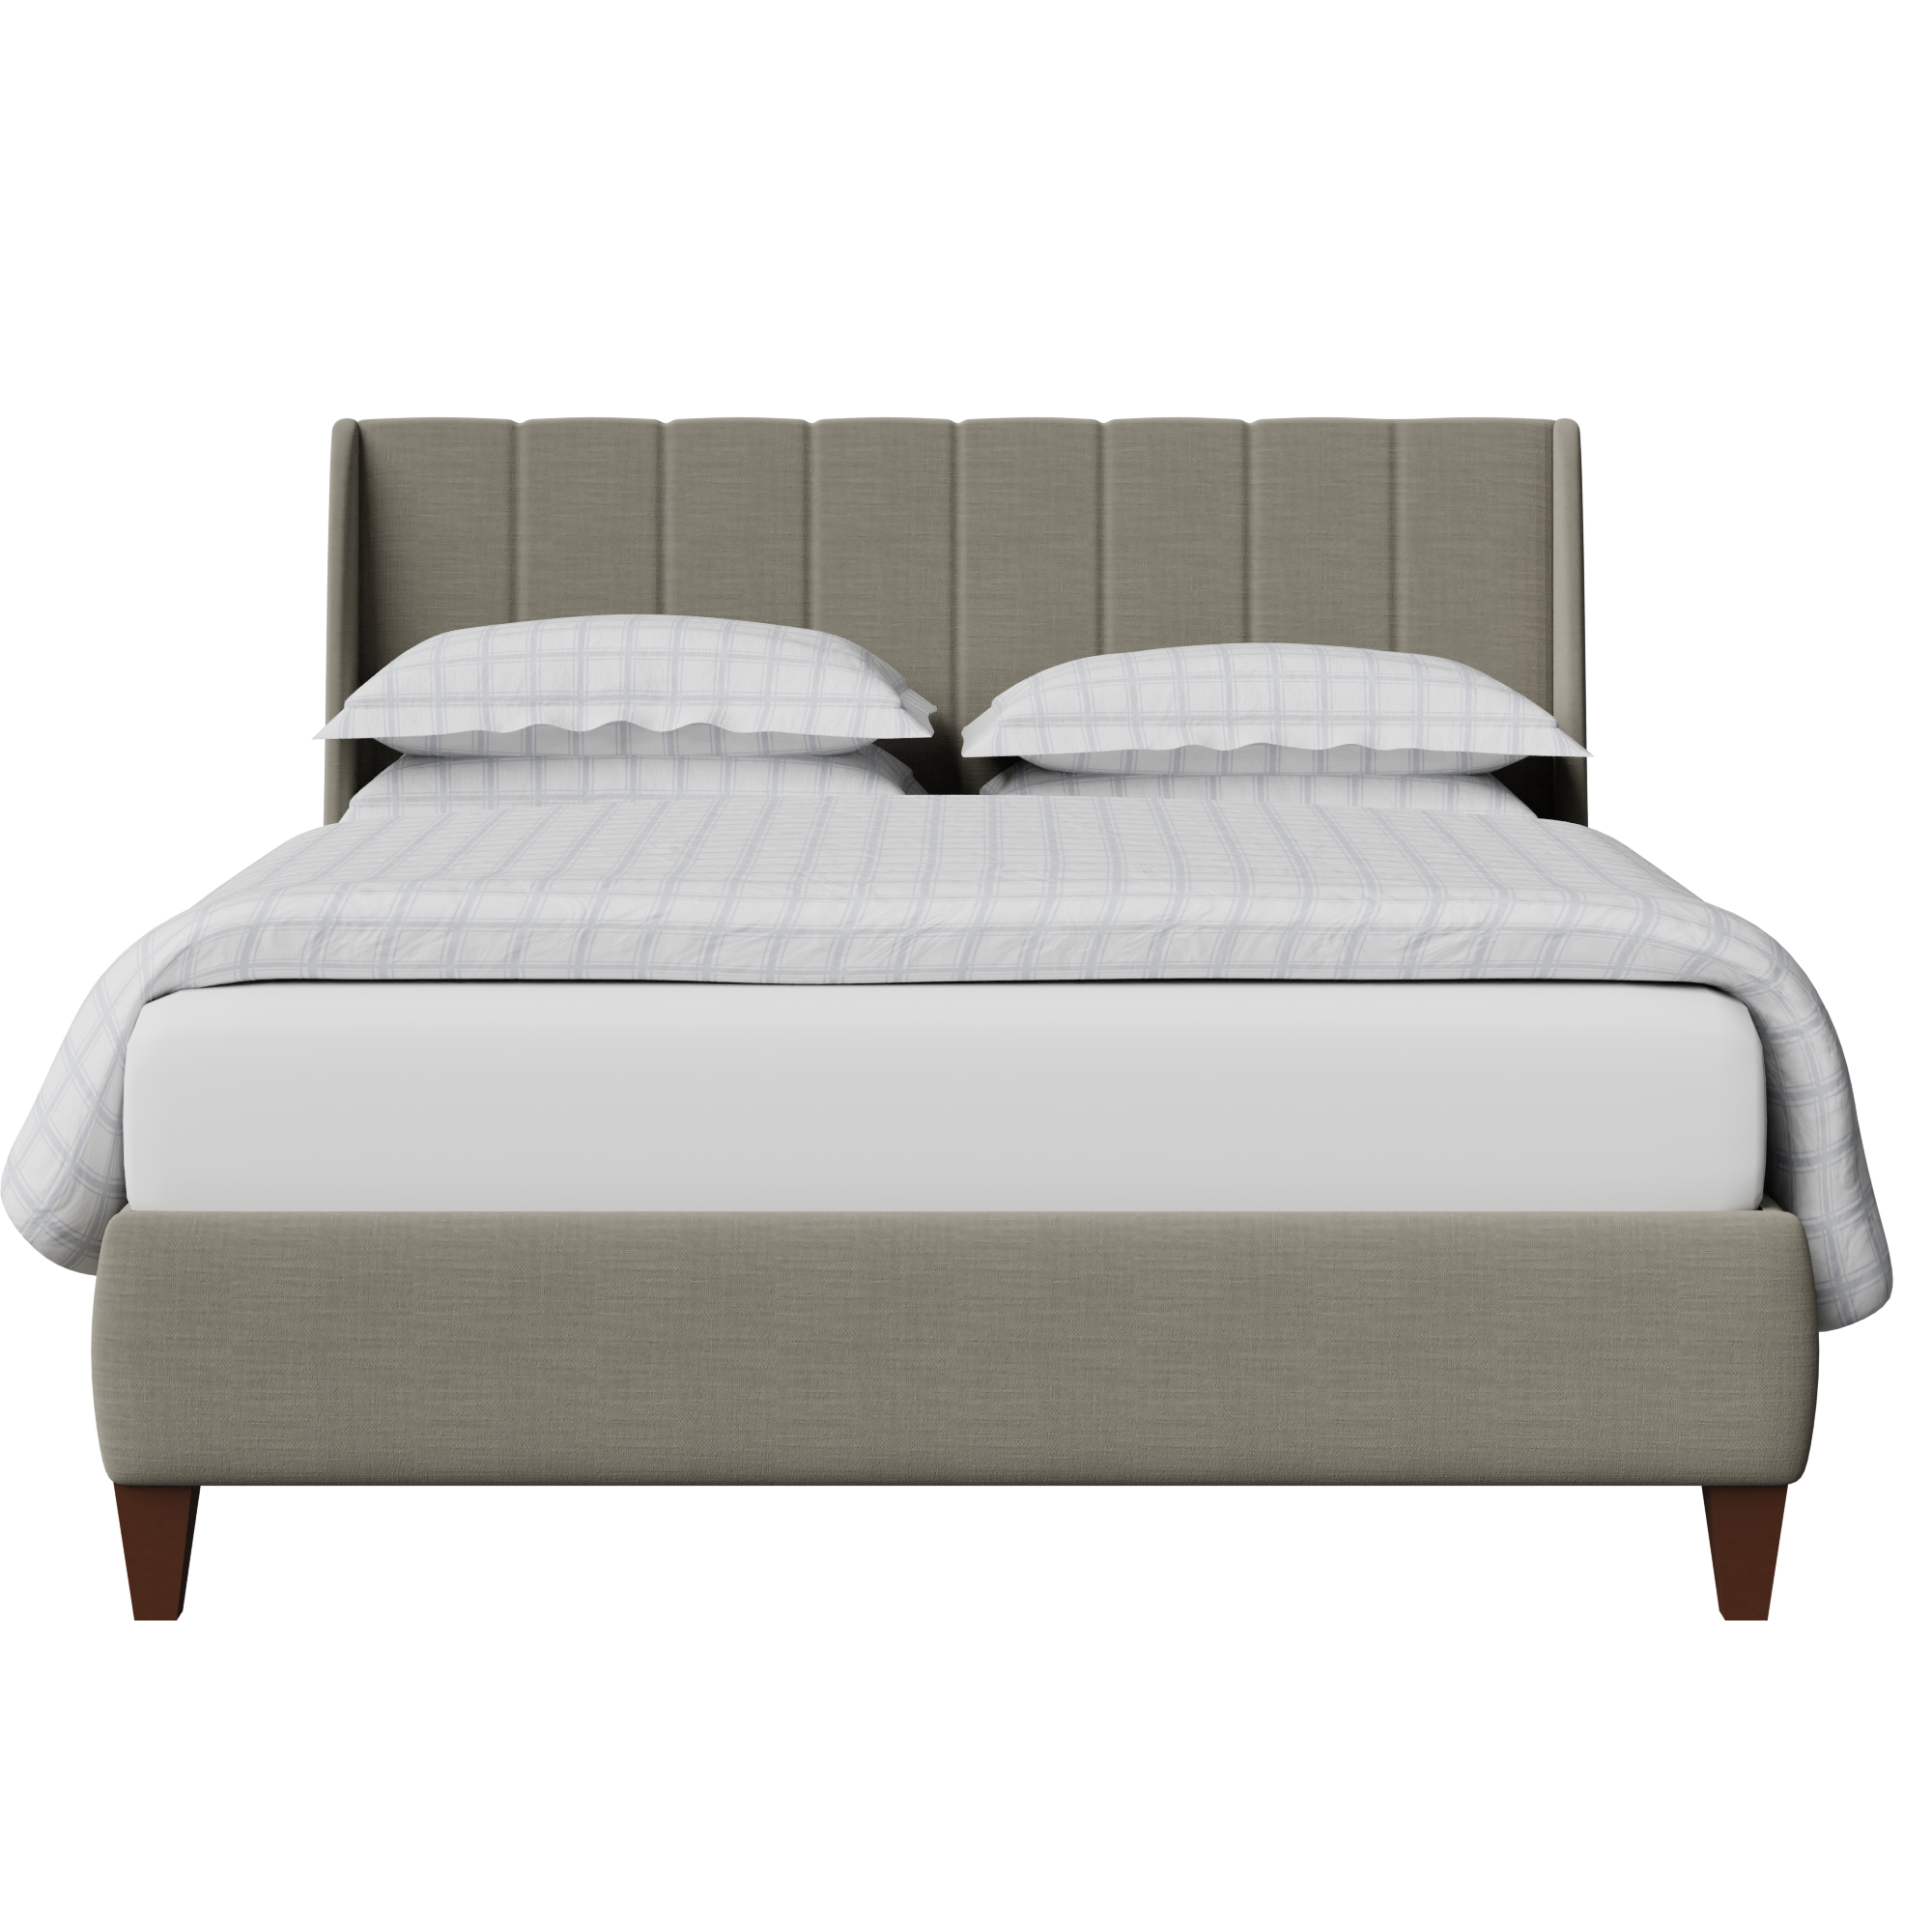 Sunderland Pleated upholstered bed in grey fabric